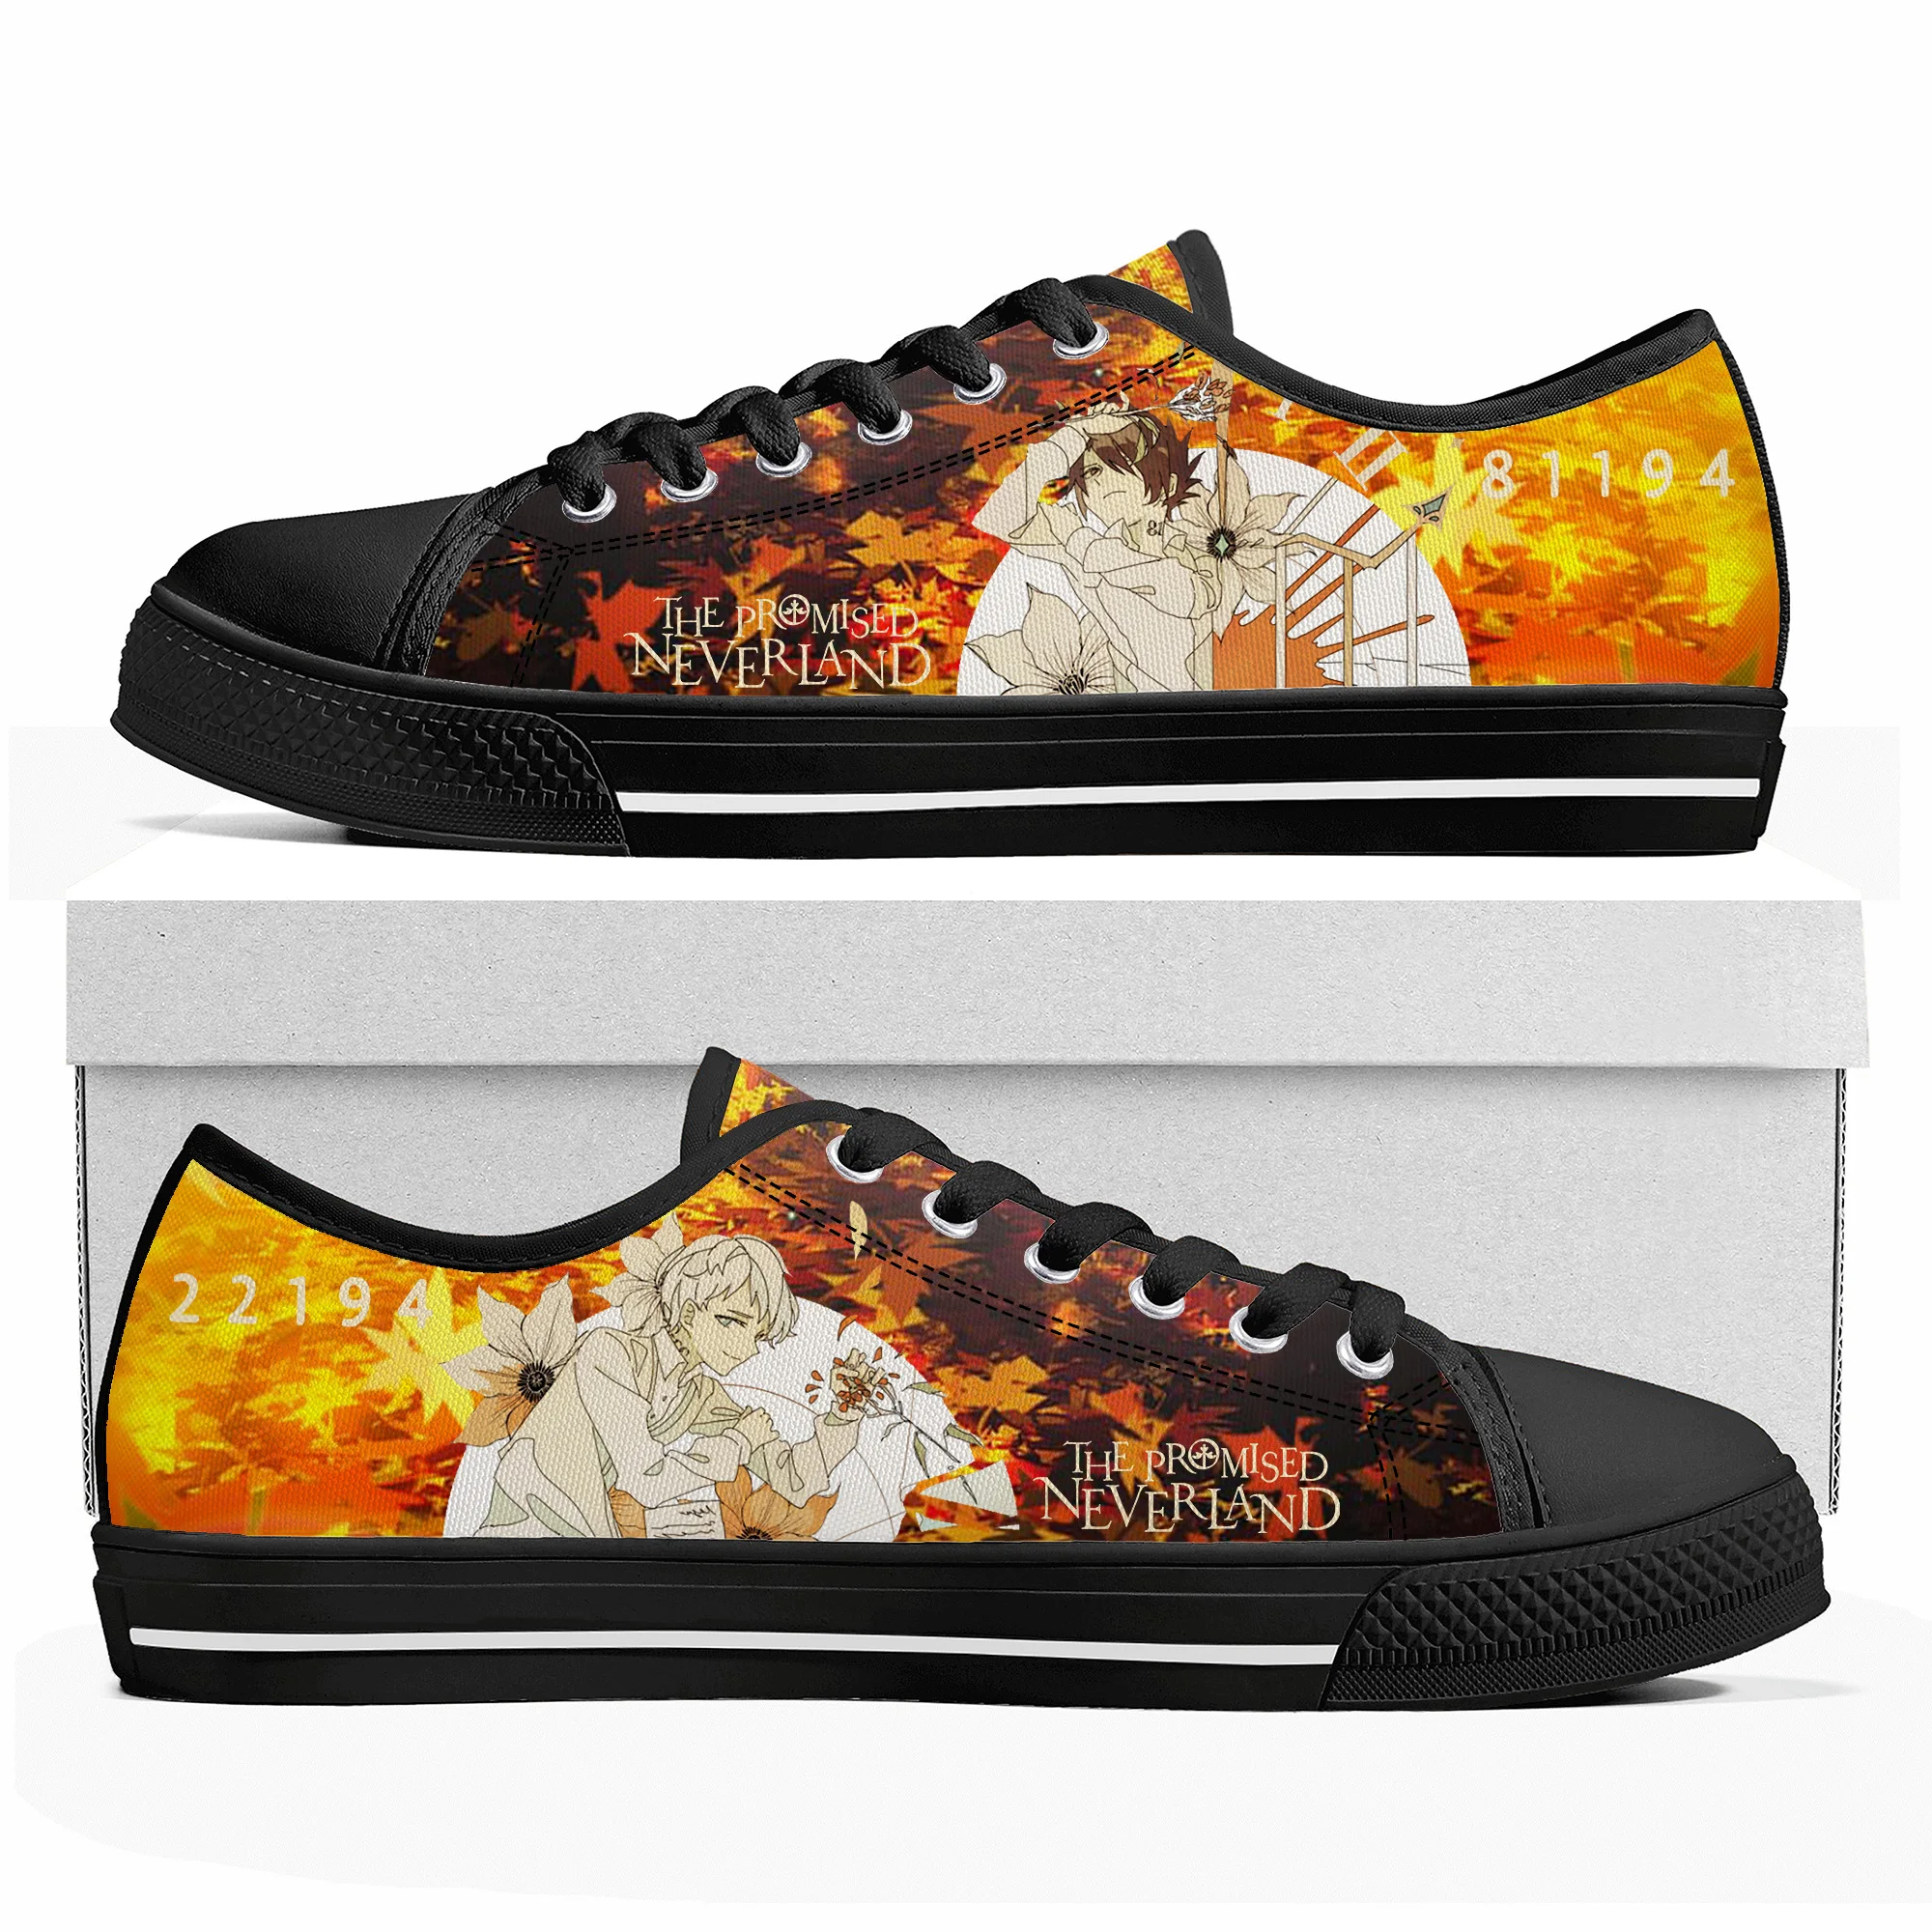 

The Promised Neverland Emma Low Top Sneakers Women Men Teenager High Quality Canvas Sneaker Casual Anime Cartoon Customize Shoes